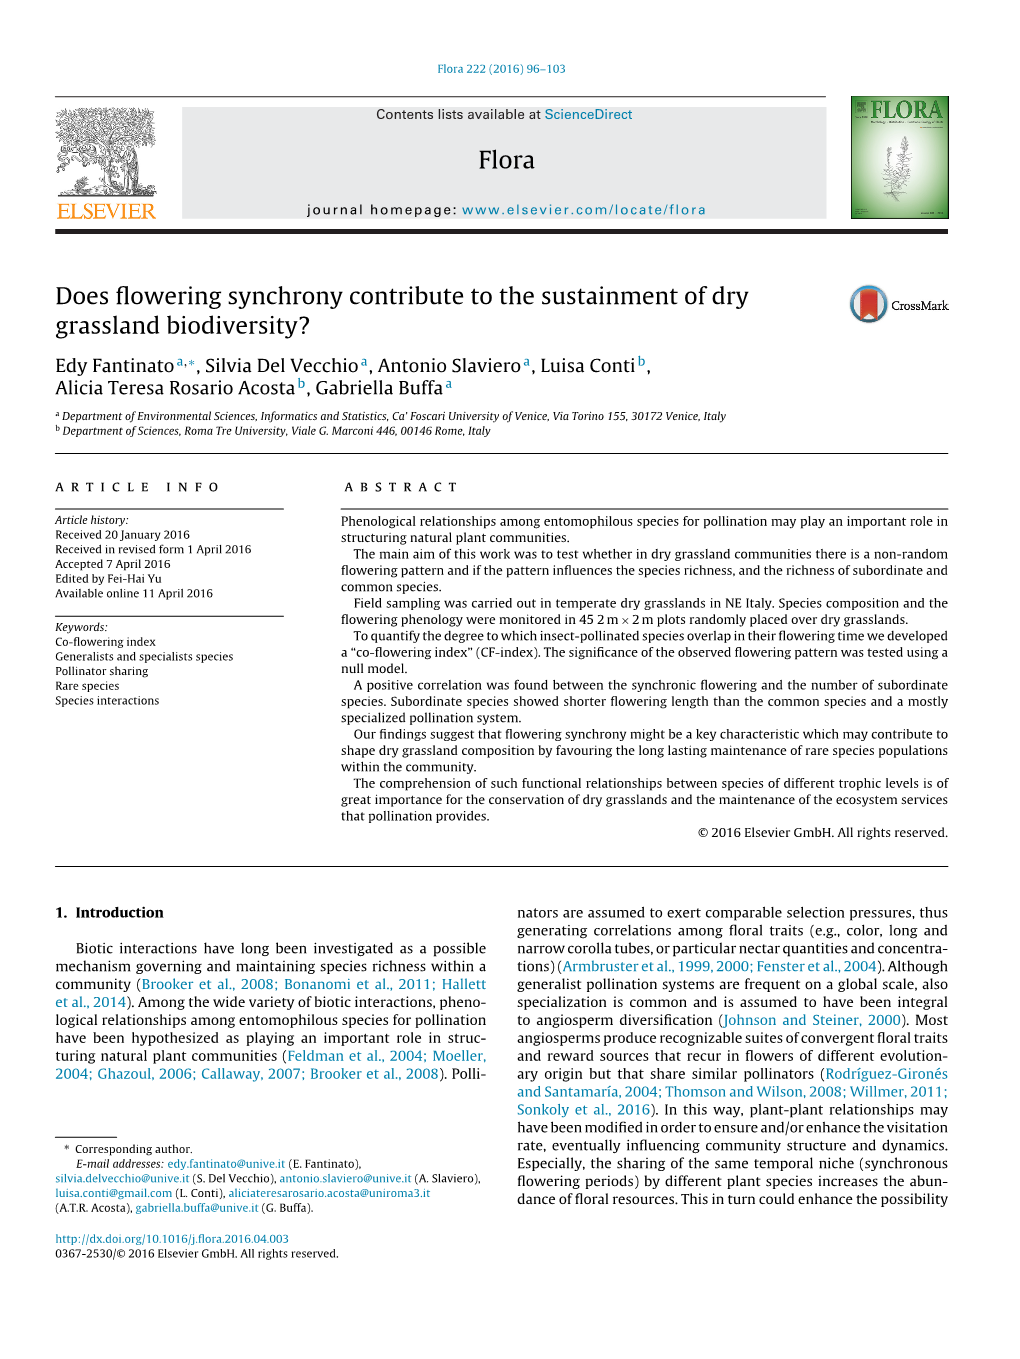 Does Flowering Synchrony Contribute to the Sustainment of Dry Grassland